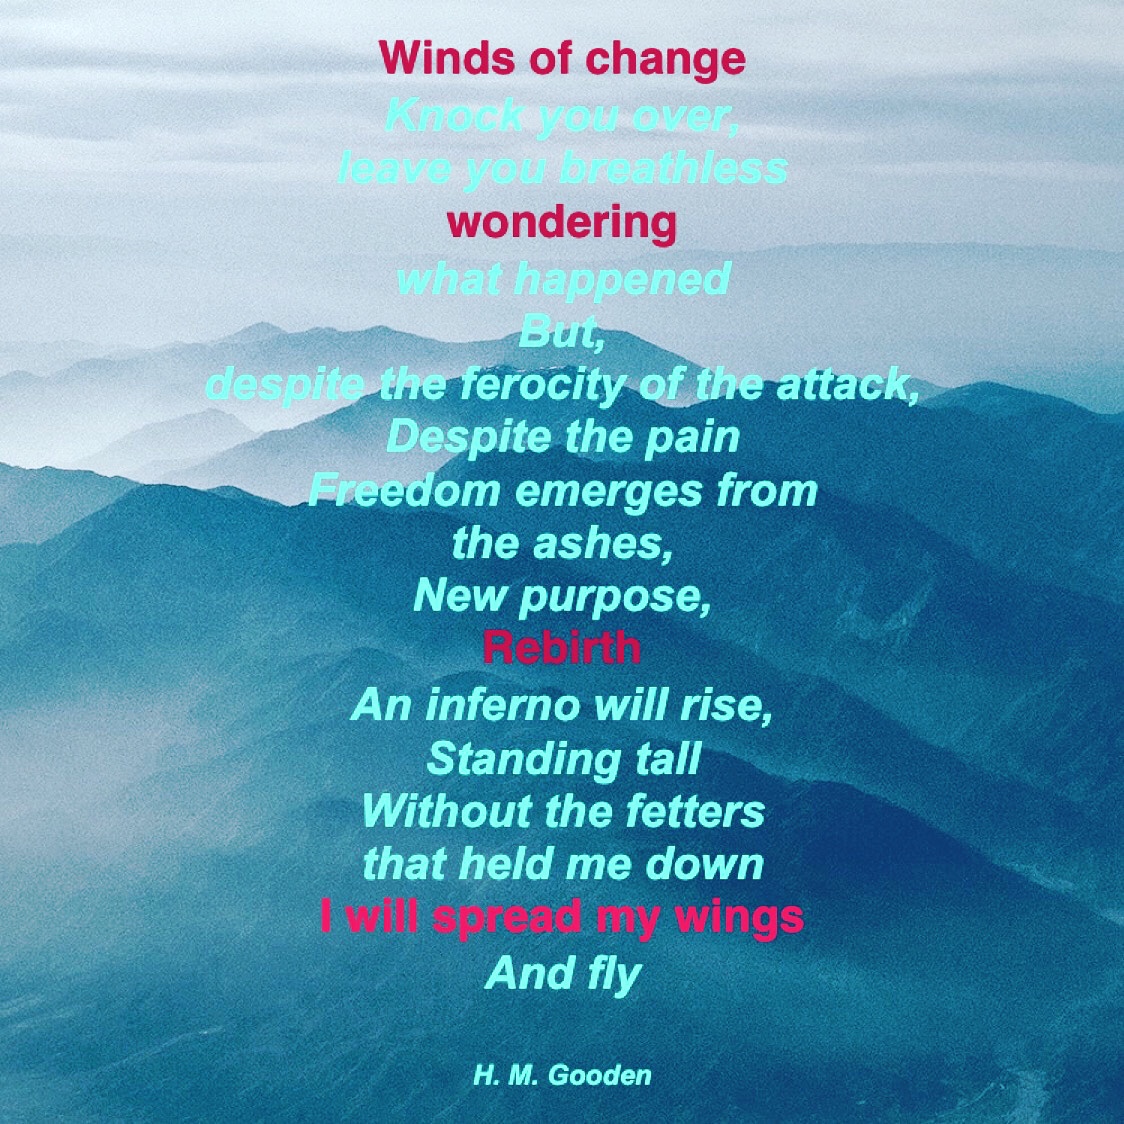 Winds of change